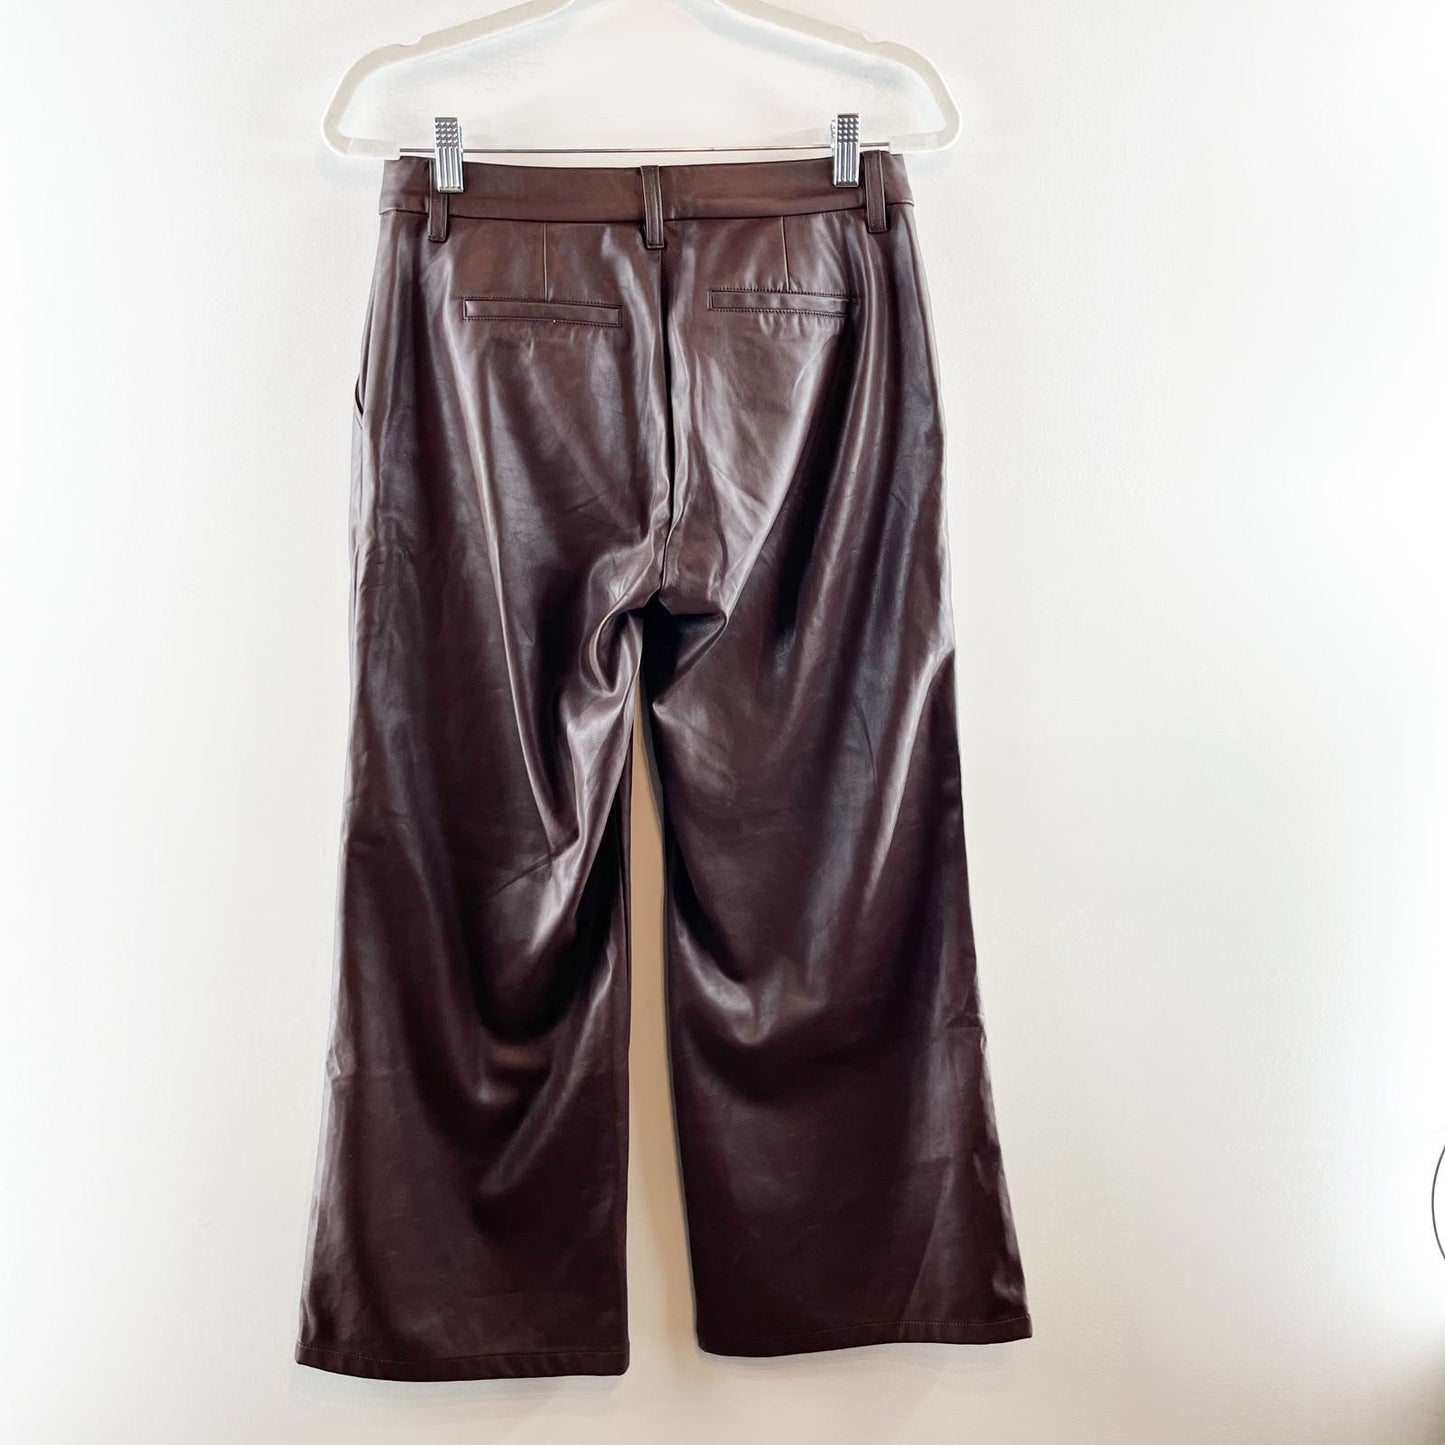 Kut From The Kloth Aubrielle Wide Leg Vegan Faux Leather Trouser Pants Brown 4